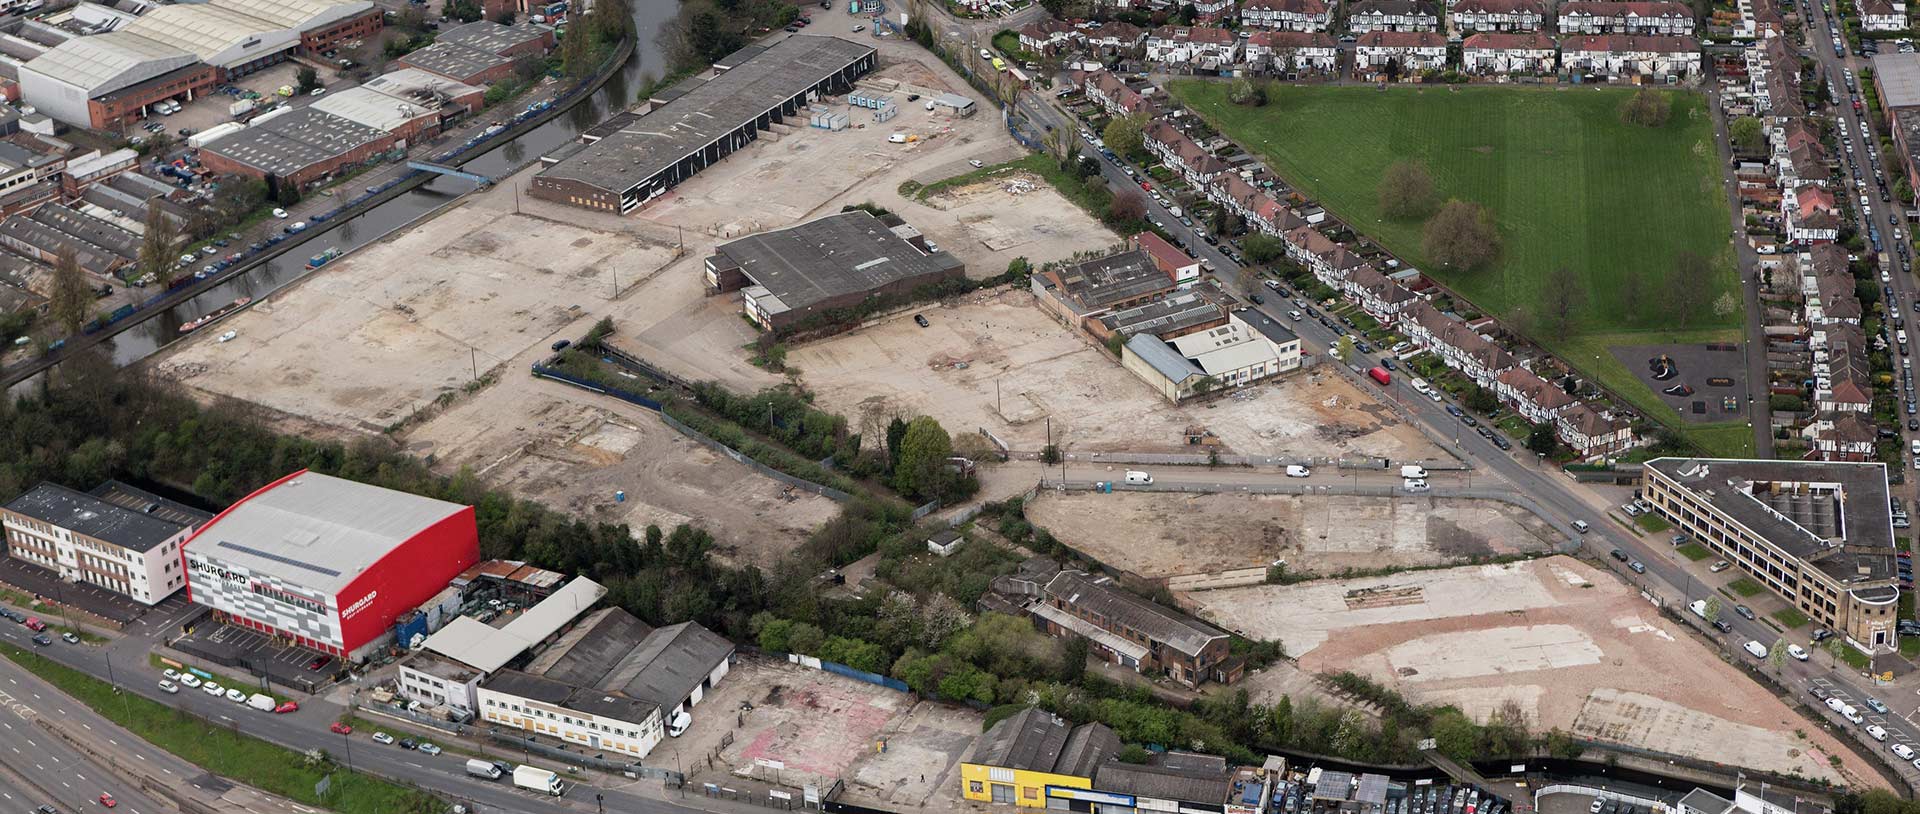 An Image of The Grand union site before regeneration started